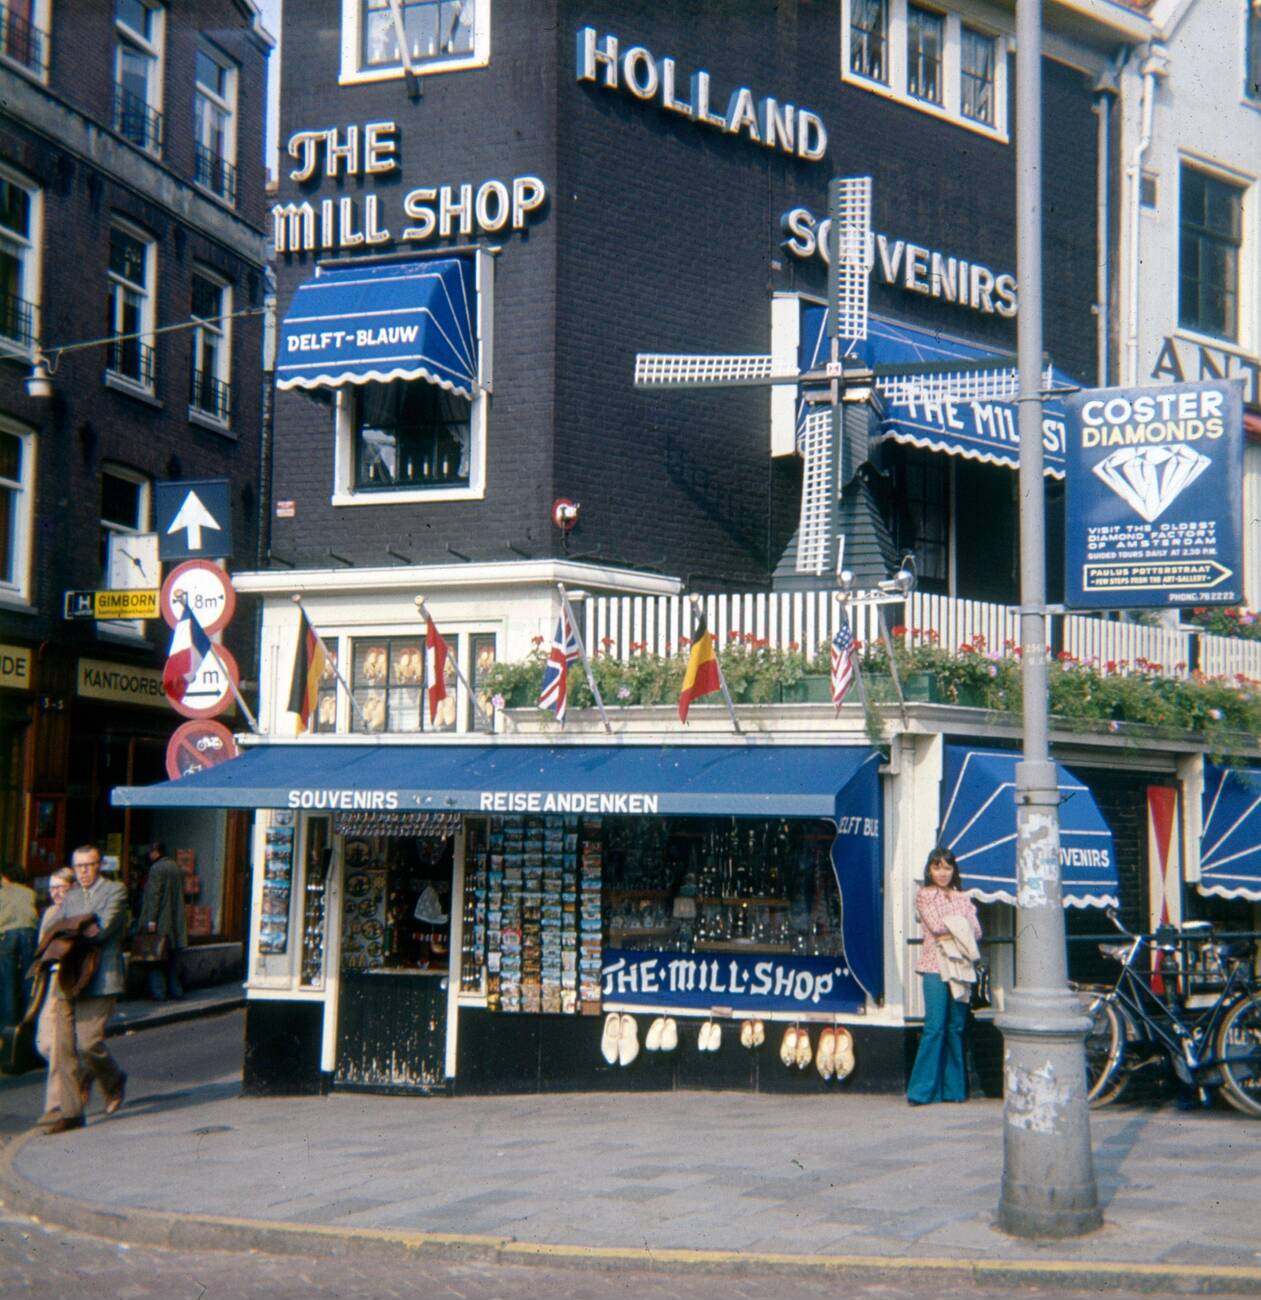 A vintage circa 1972 photograph of The Mill Shop - Holland Souvenirs, located at Rokin 123 in Amsterdam, The Netherlands, near the Oude Turfmarkt (Old Peat Market).